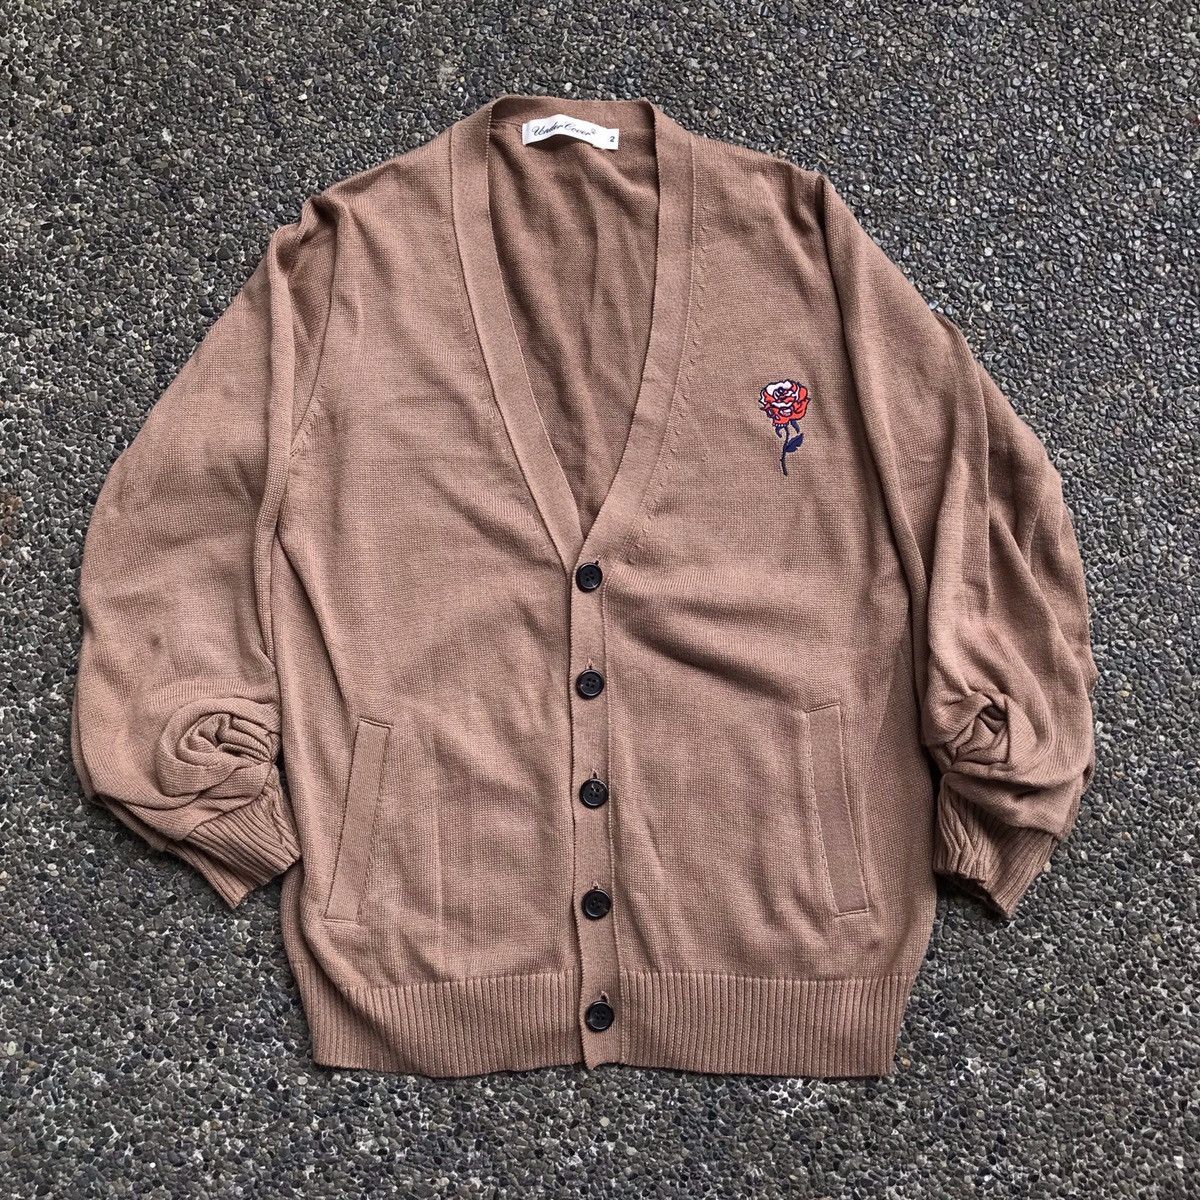 Undercover Undercover cardigan Rose Embroidered Cardigan | Grailed